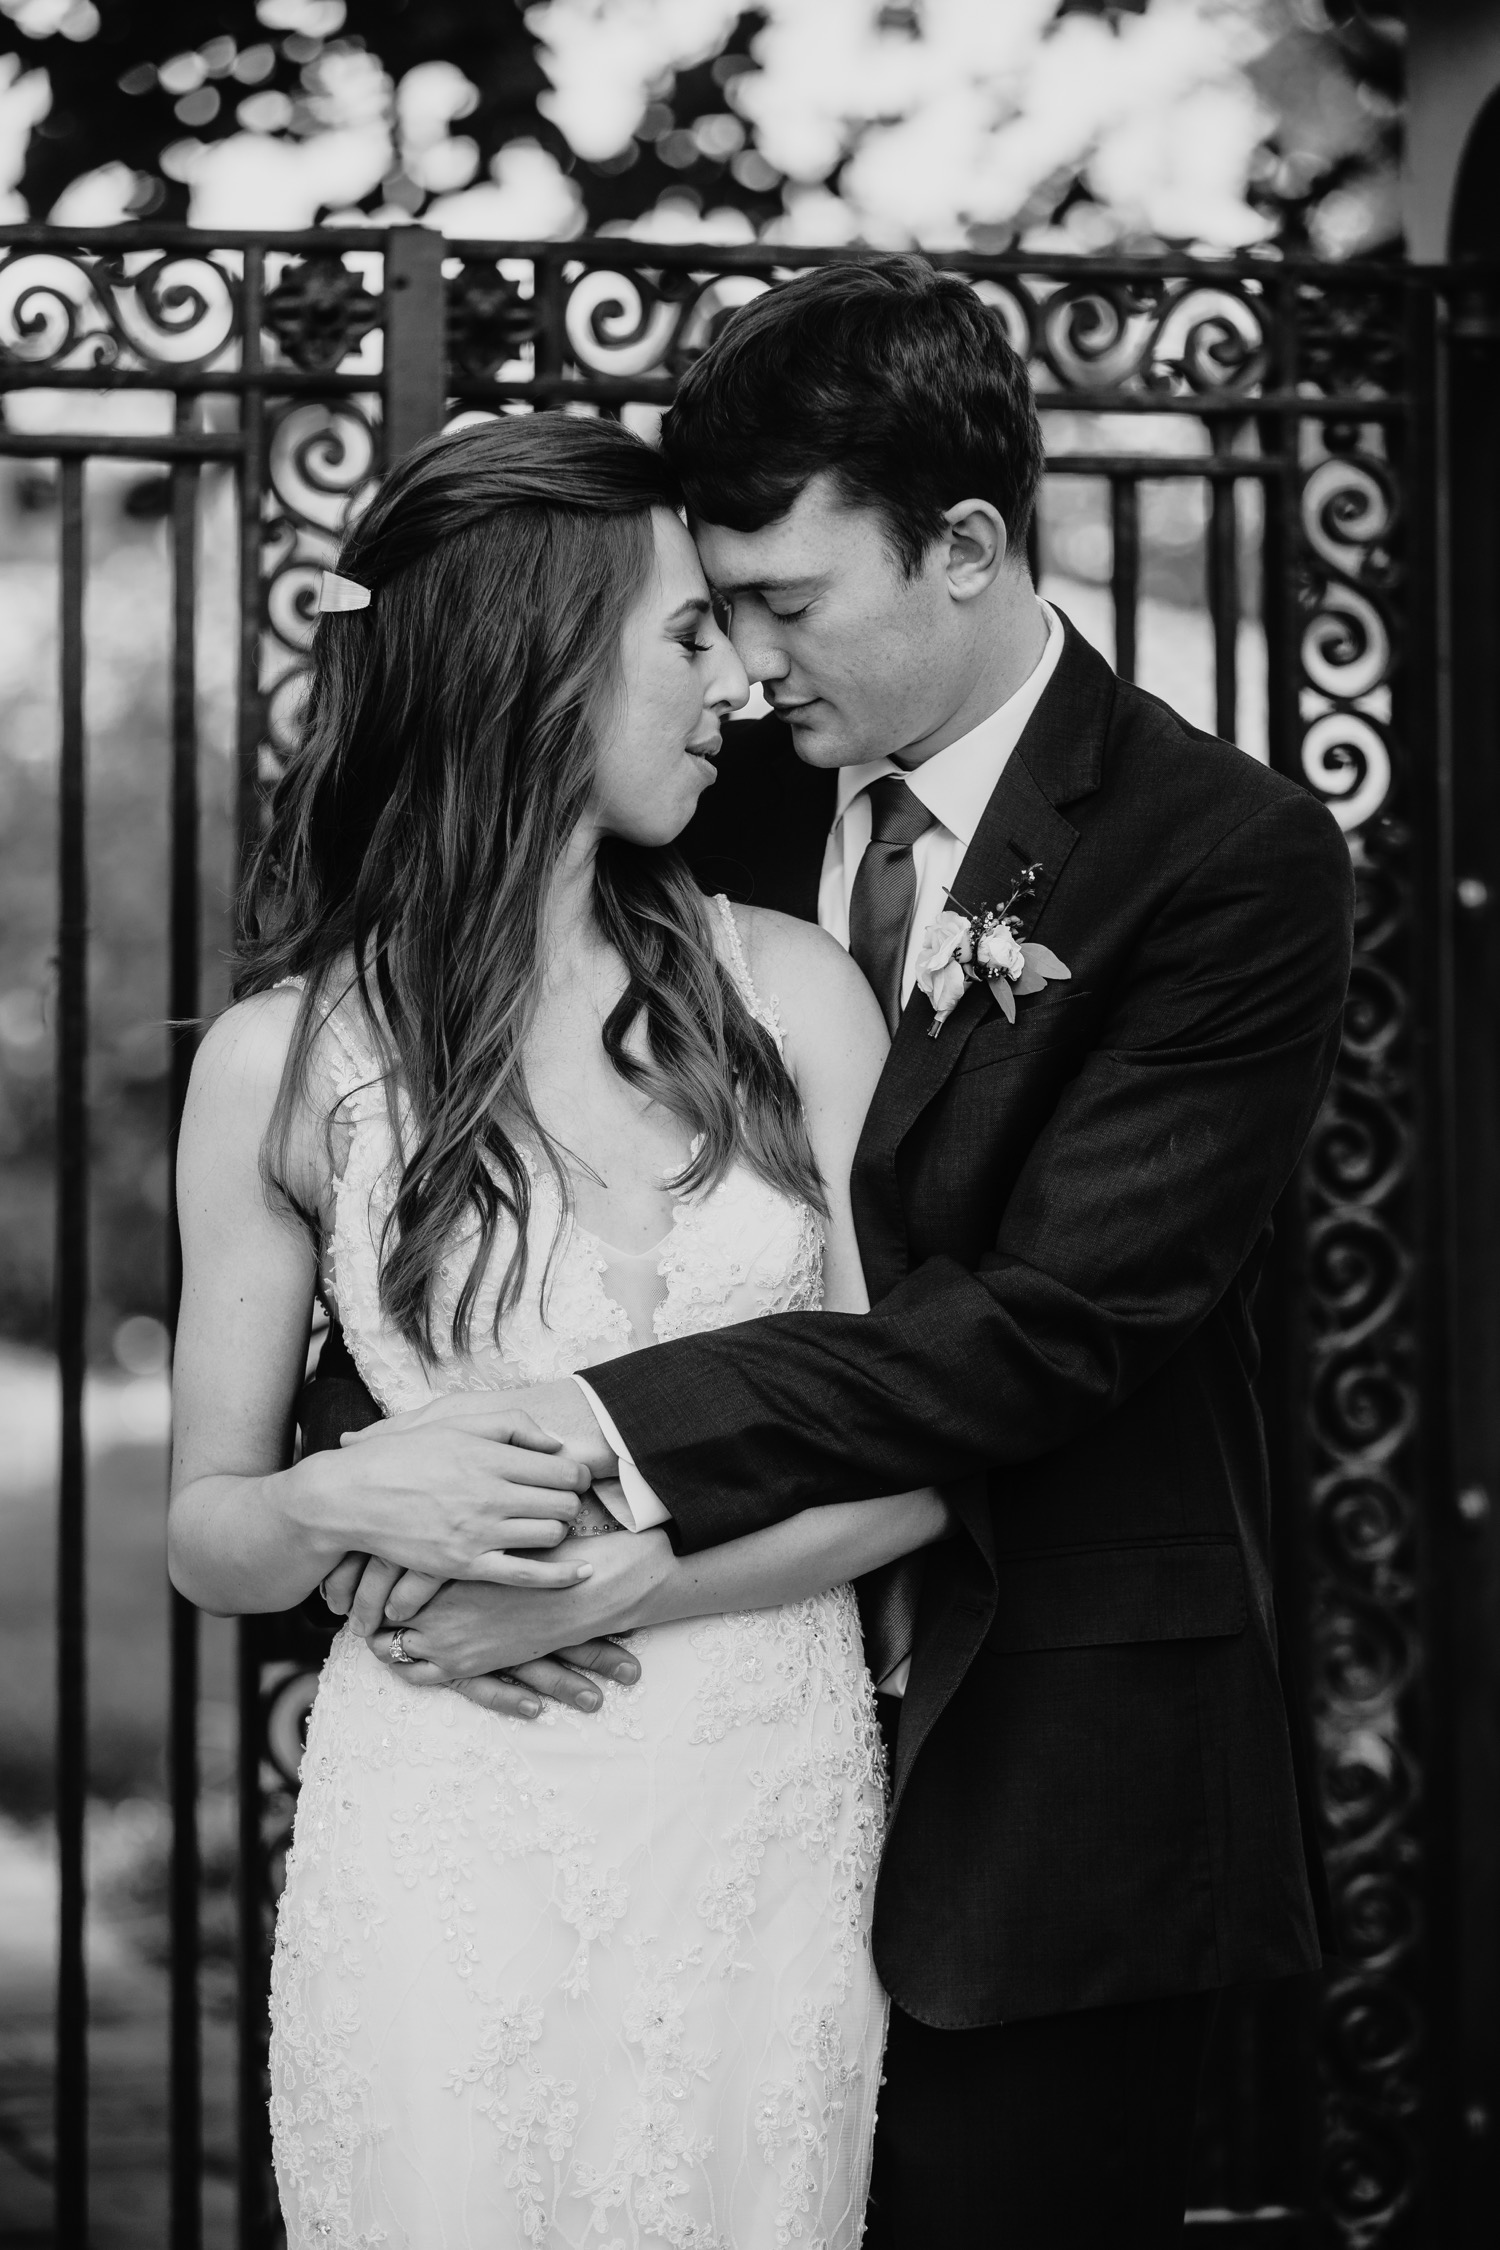 Black and white image of groom hugging bride from the side and their foreheads touching. Alayna and Trey's wedding at The Maples in Woodland, CA.